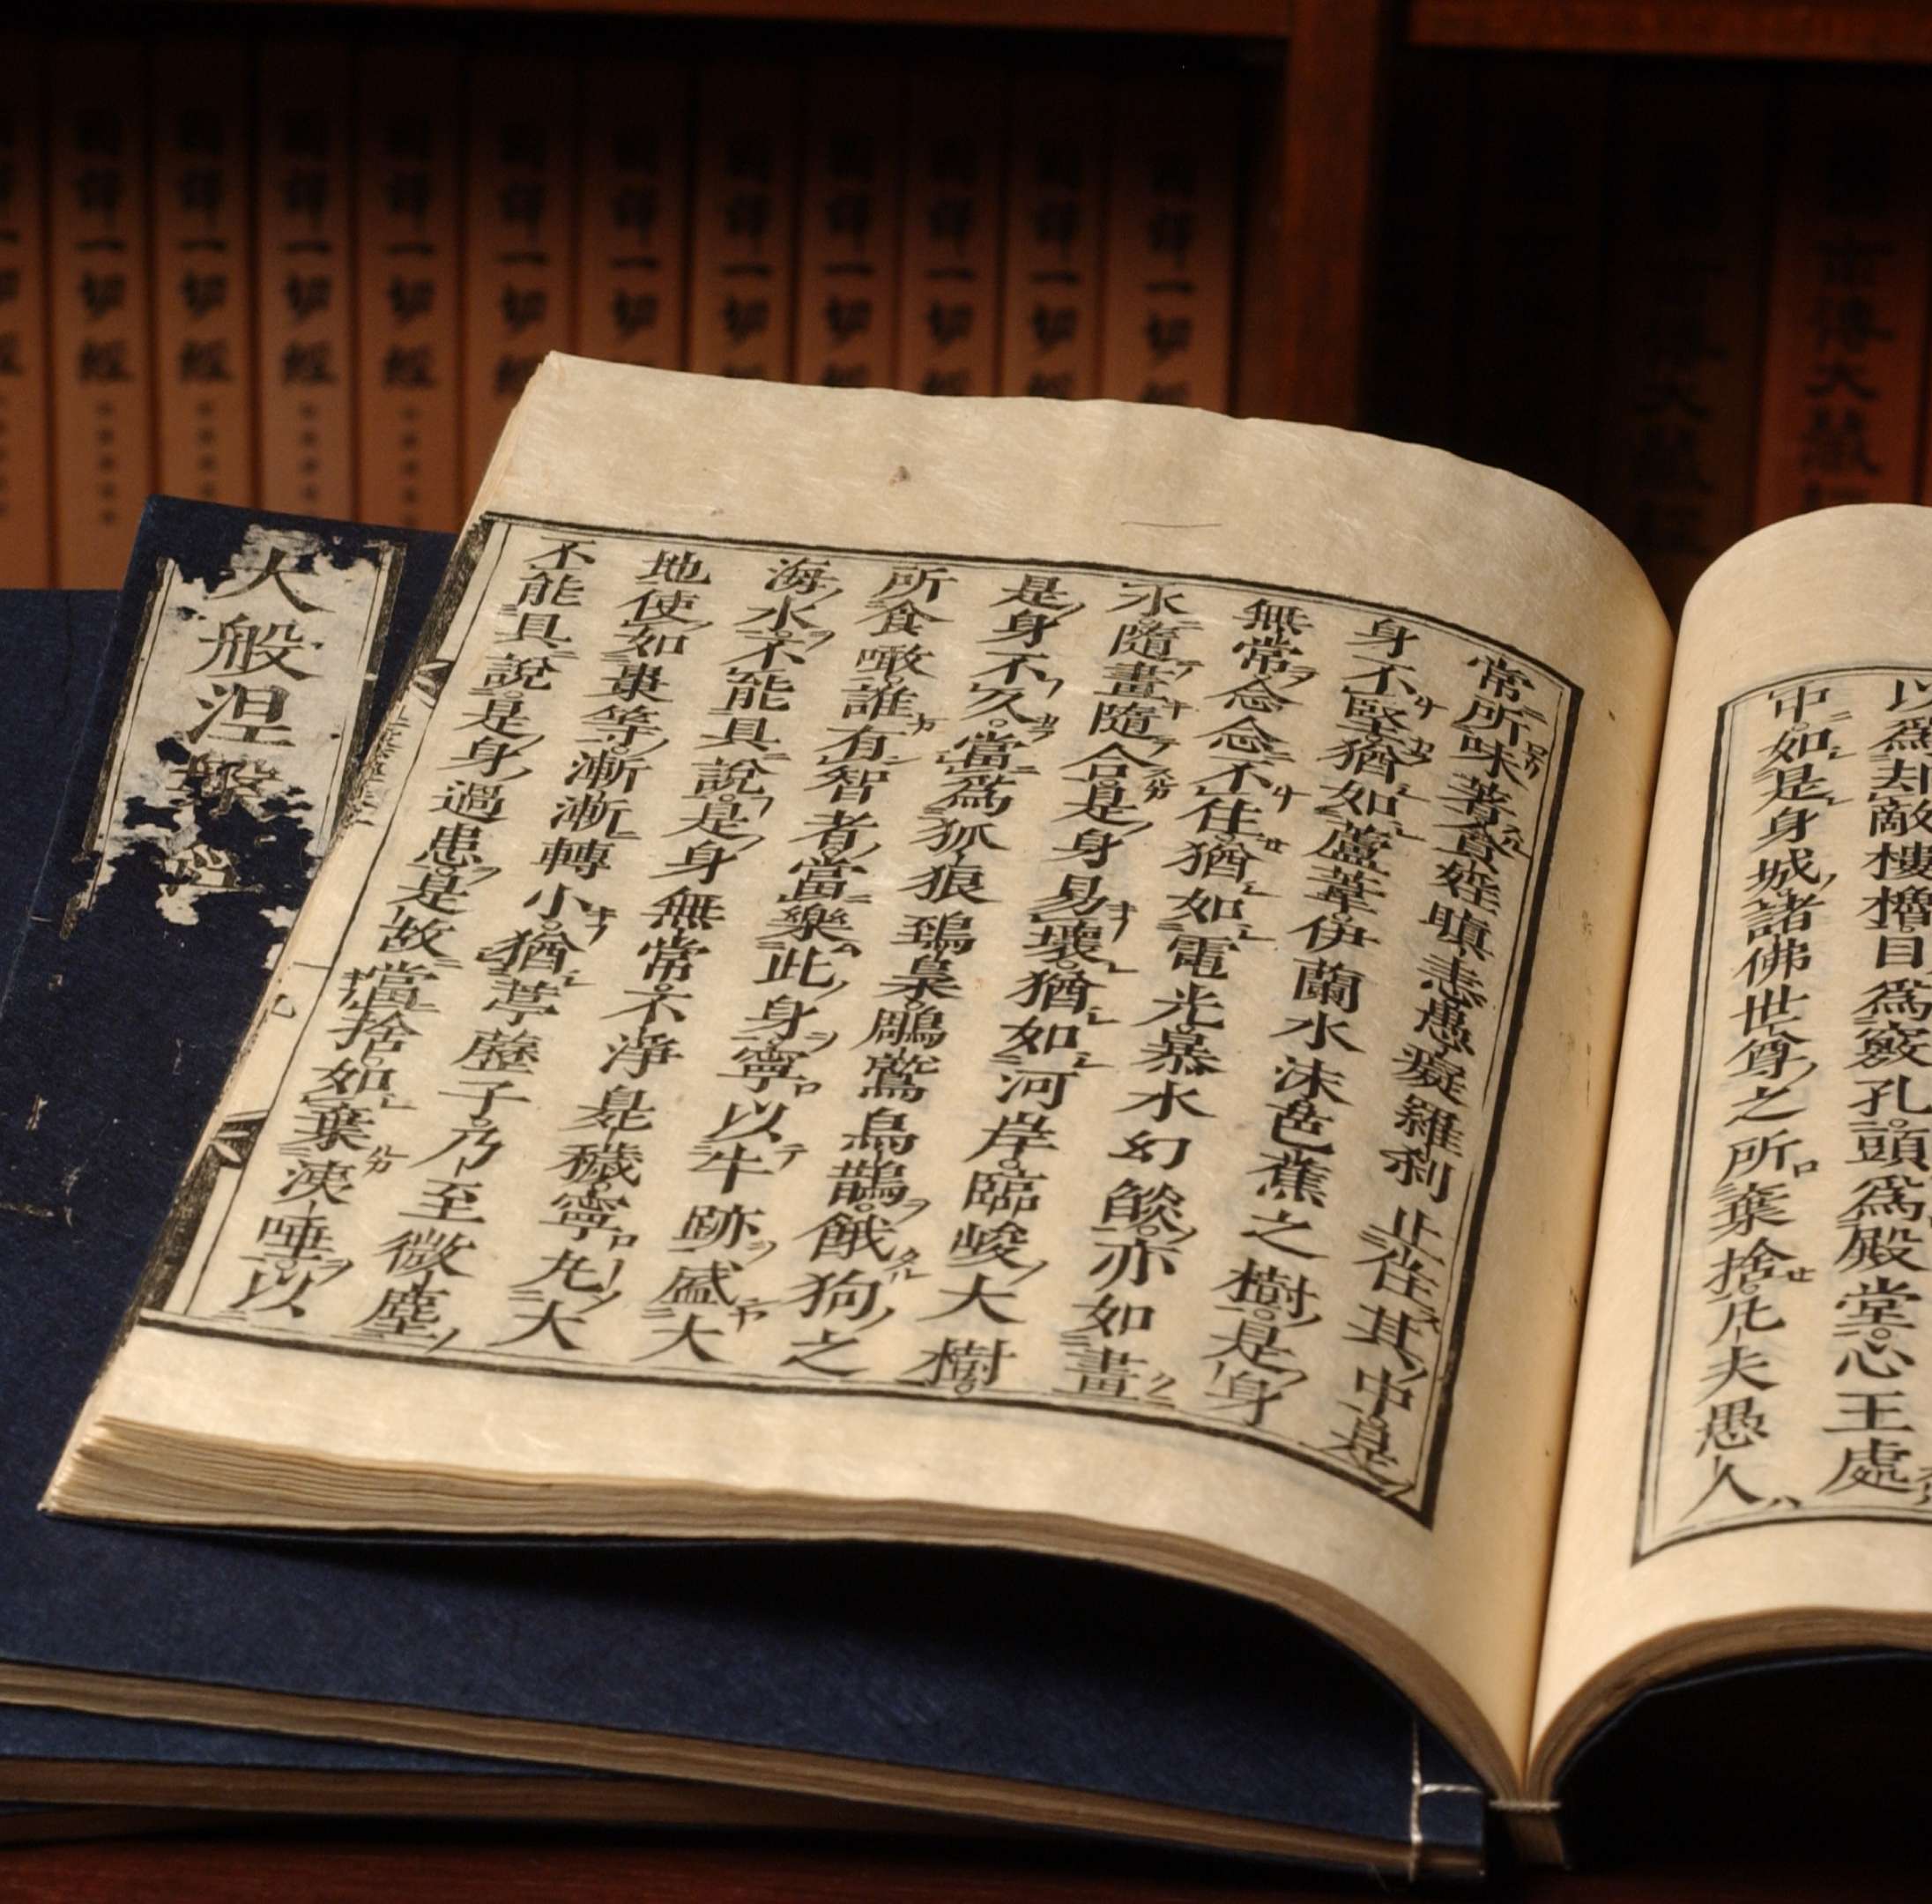 A volume of the Buddhist Canon sits opened to a page filled with vertical rows of Chinese characters.